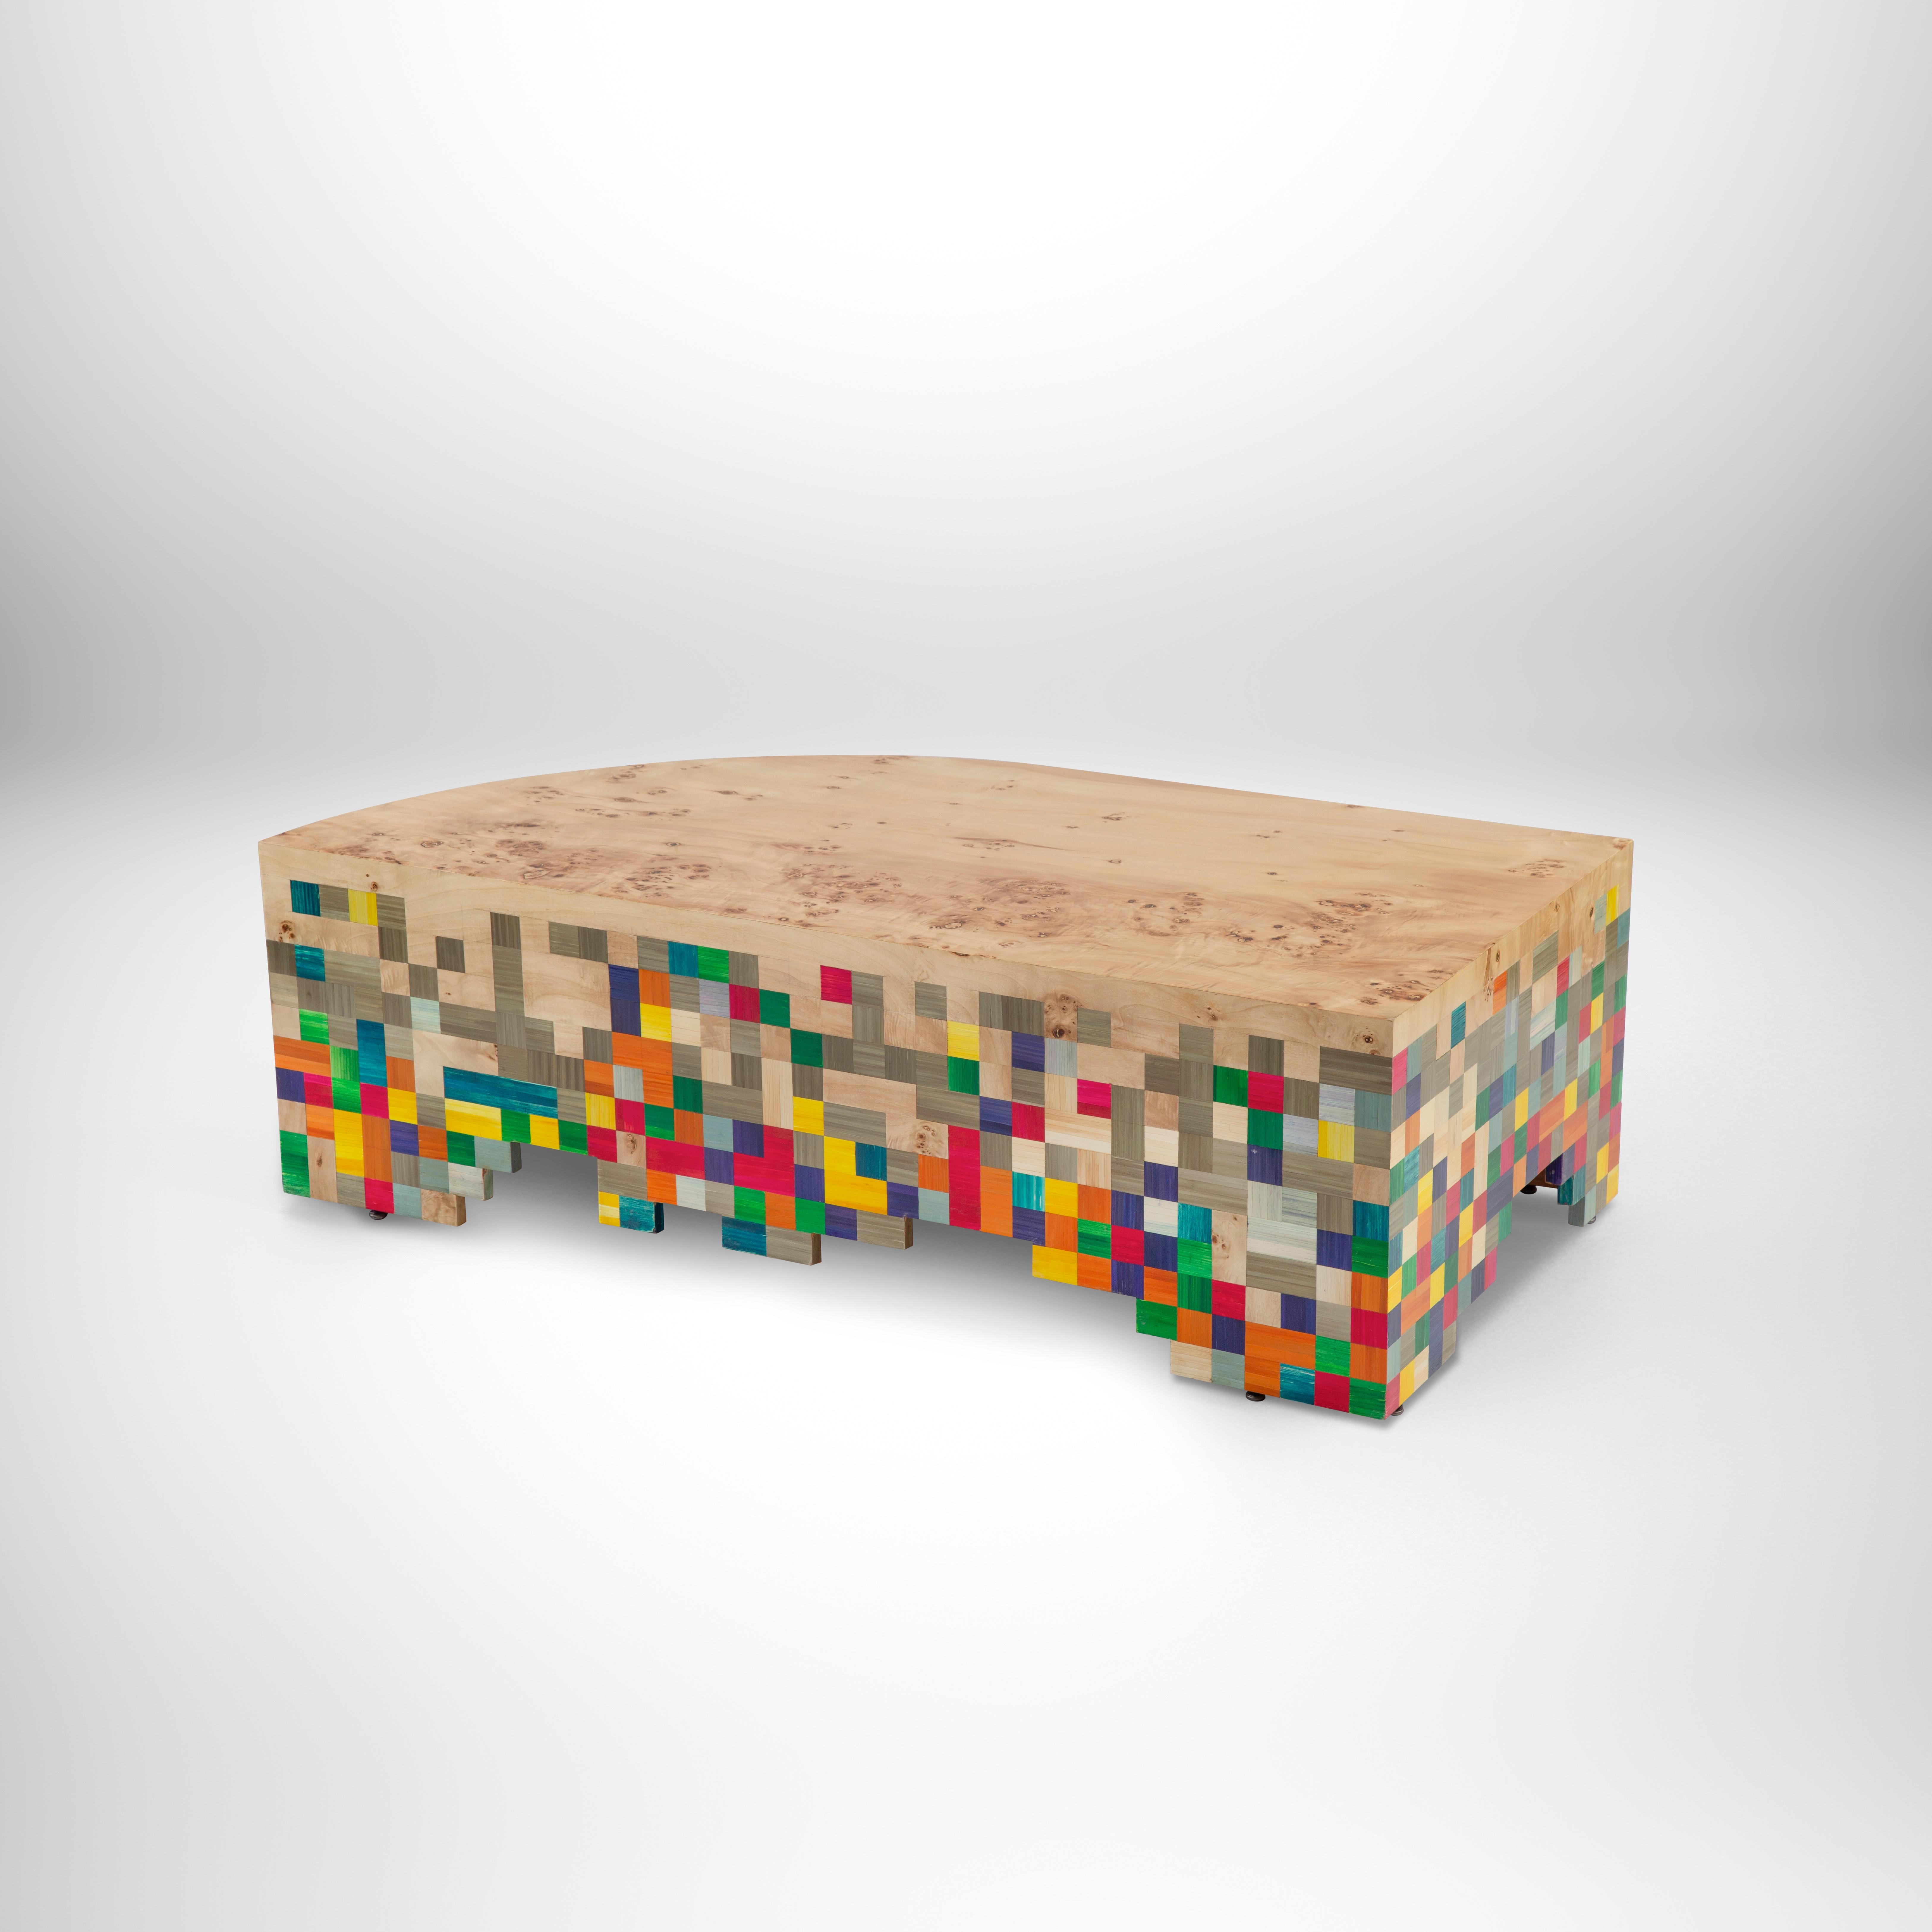 Hand-Crafted Asymmetric Colorful Hand-Laid Straw Coffee Table with Rare Apple Rind Veneer For Sale